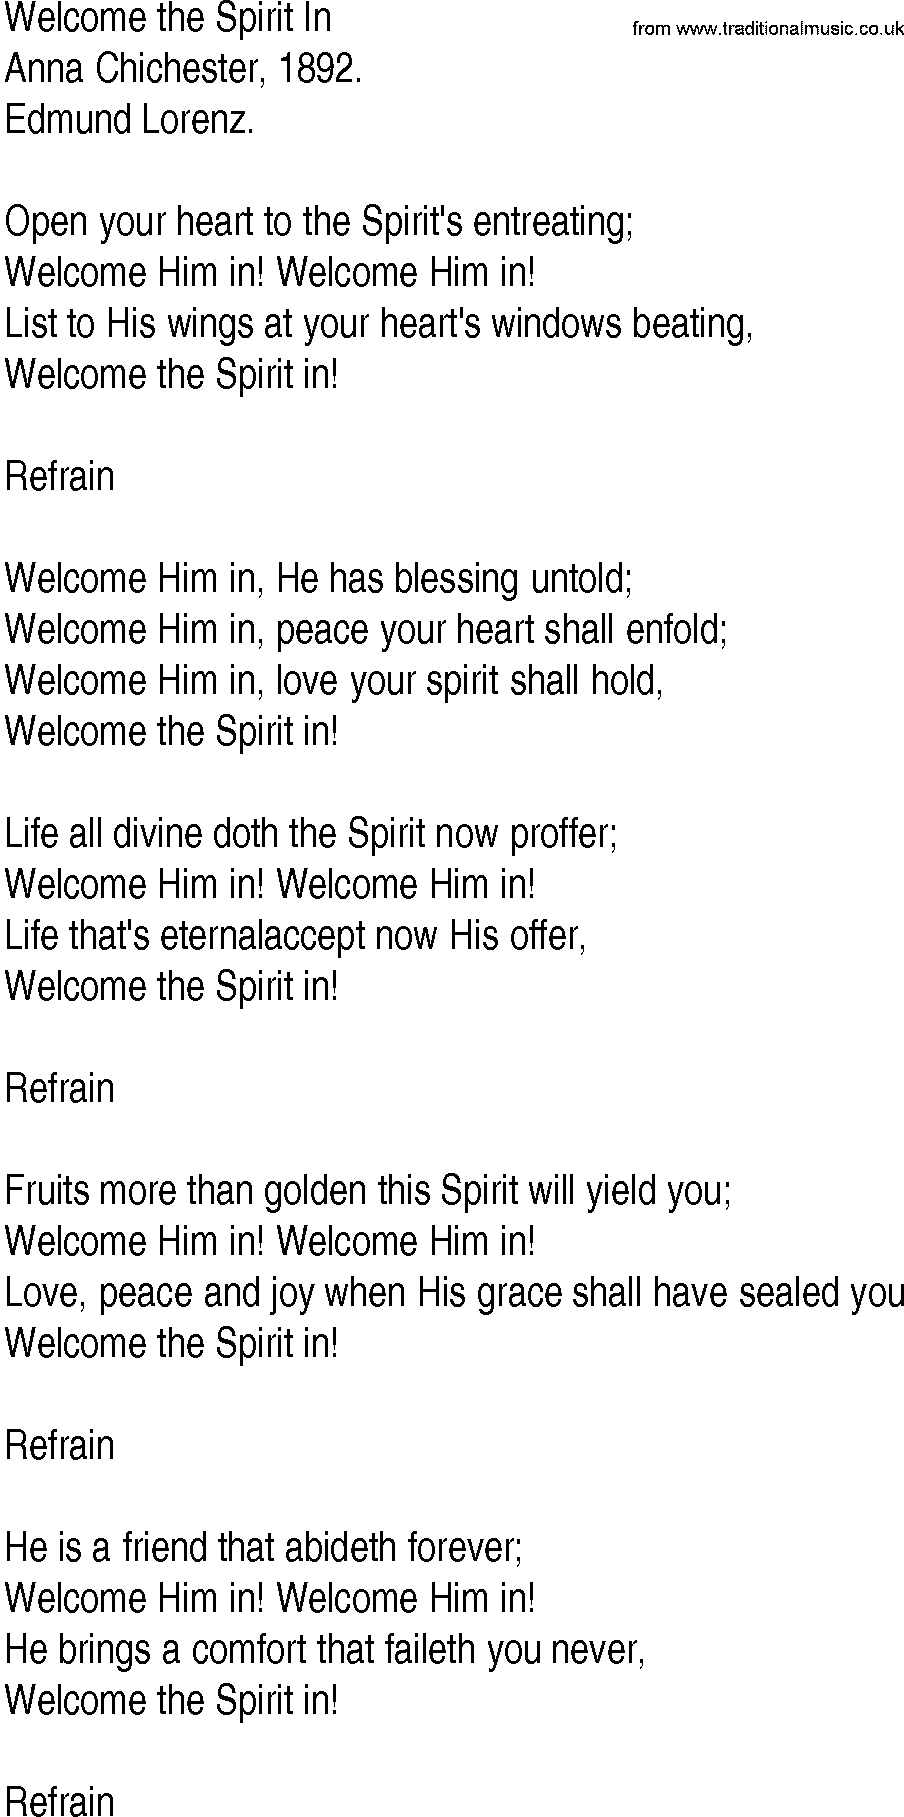 Hymn and Gospel Song: Welcome the Spirit In by Anna Chichester lyrics